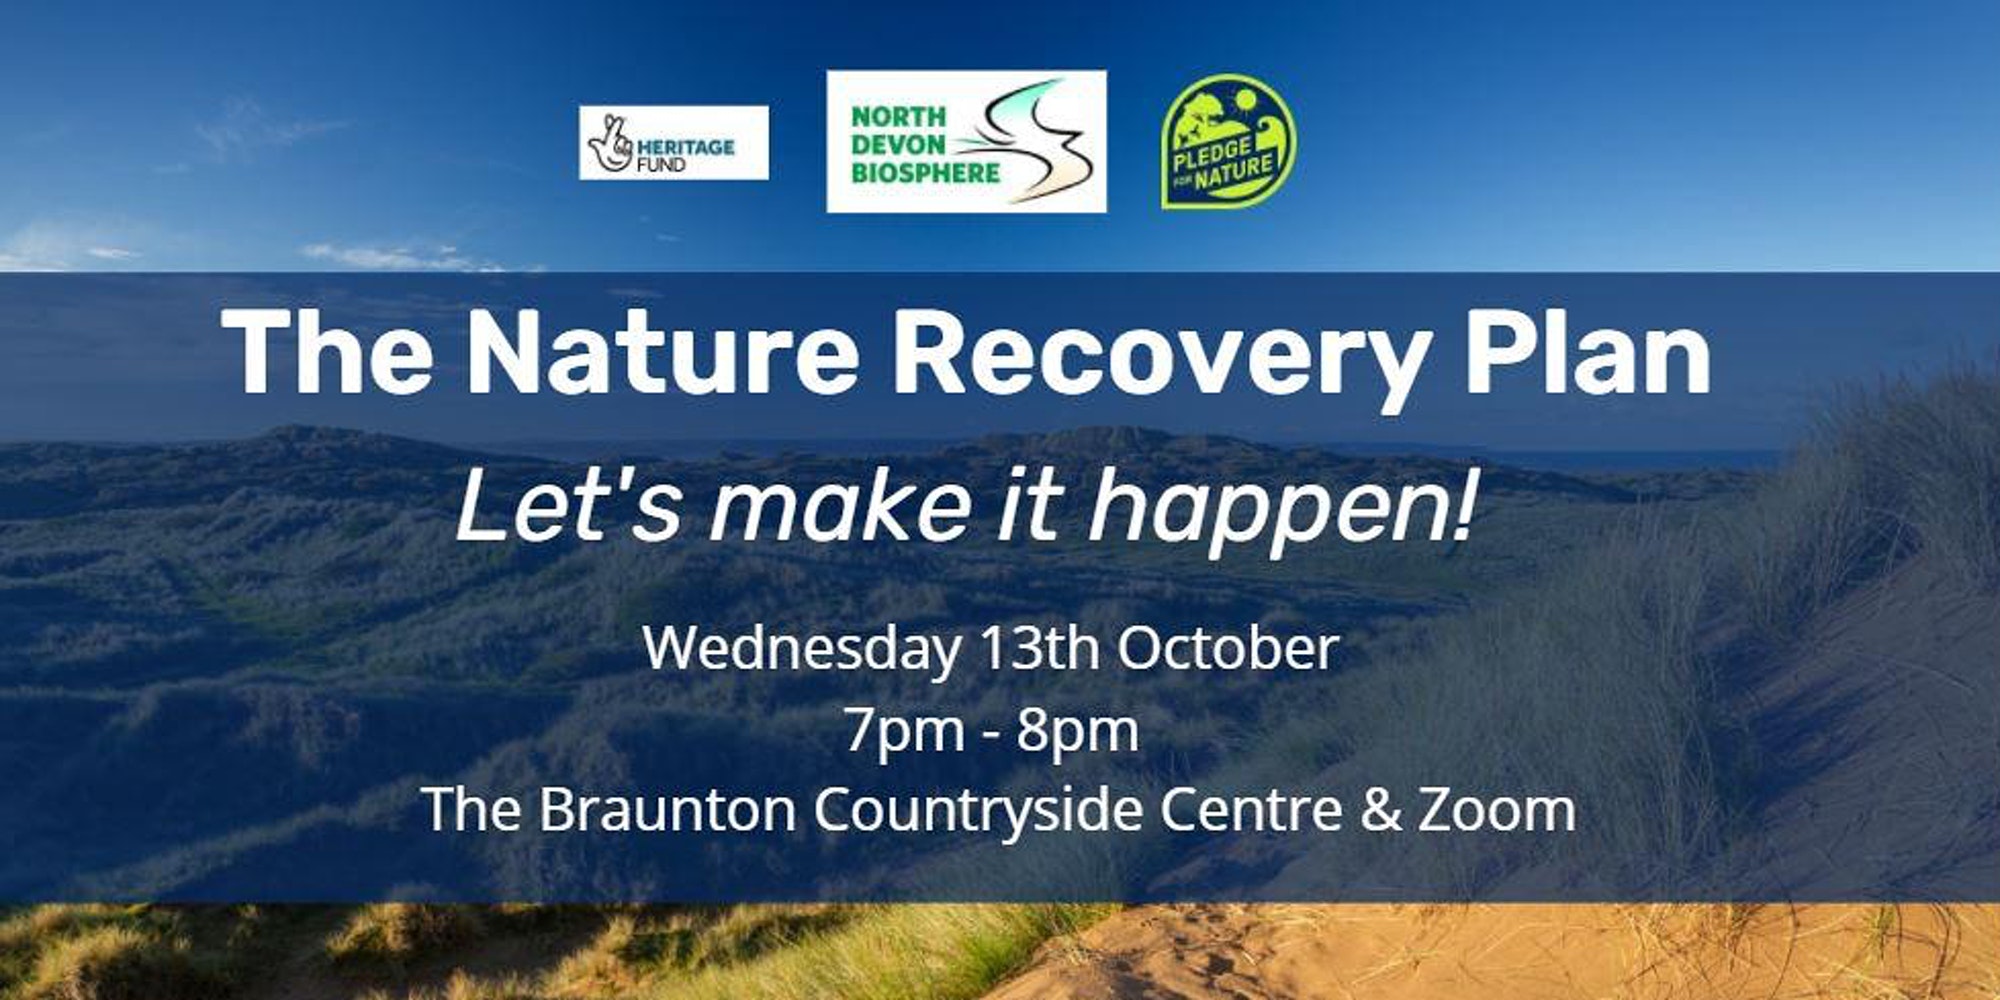 The Biosphere Nature Recovery Plan – Let’s Make It Happen!